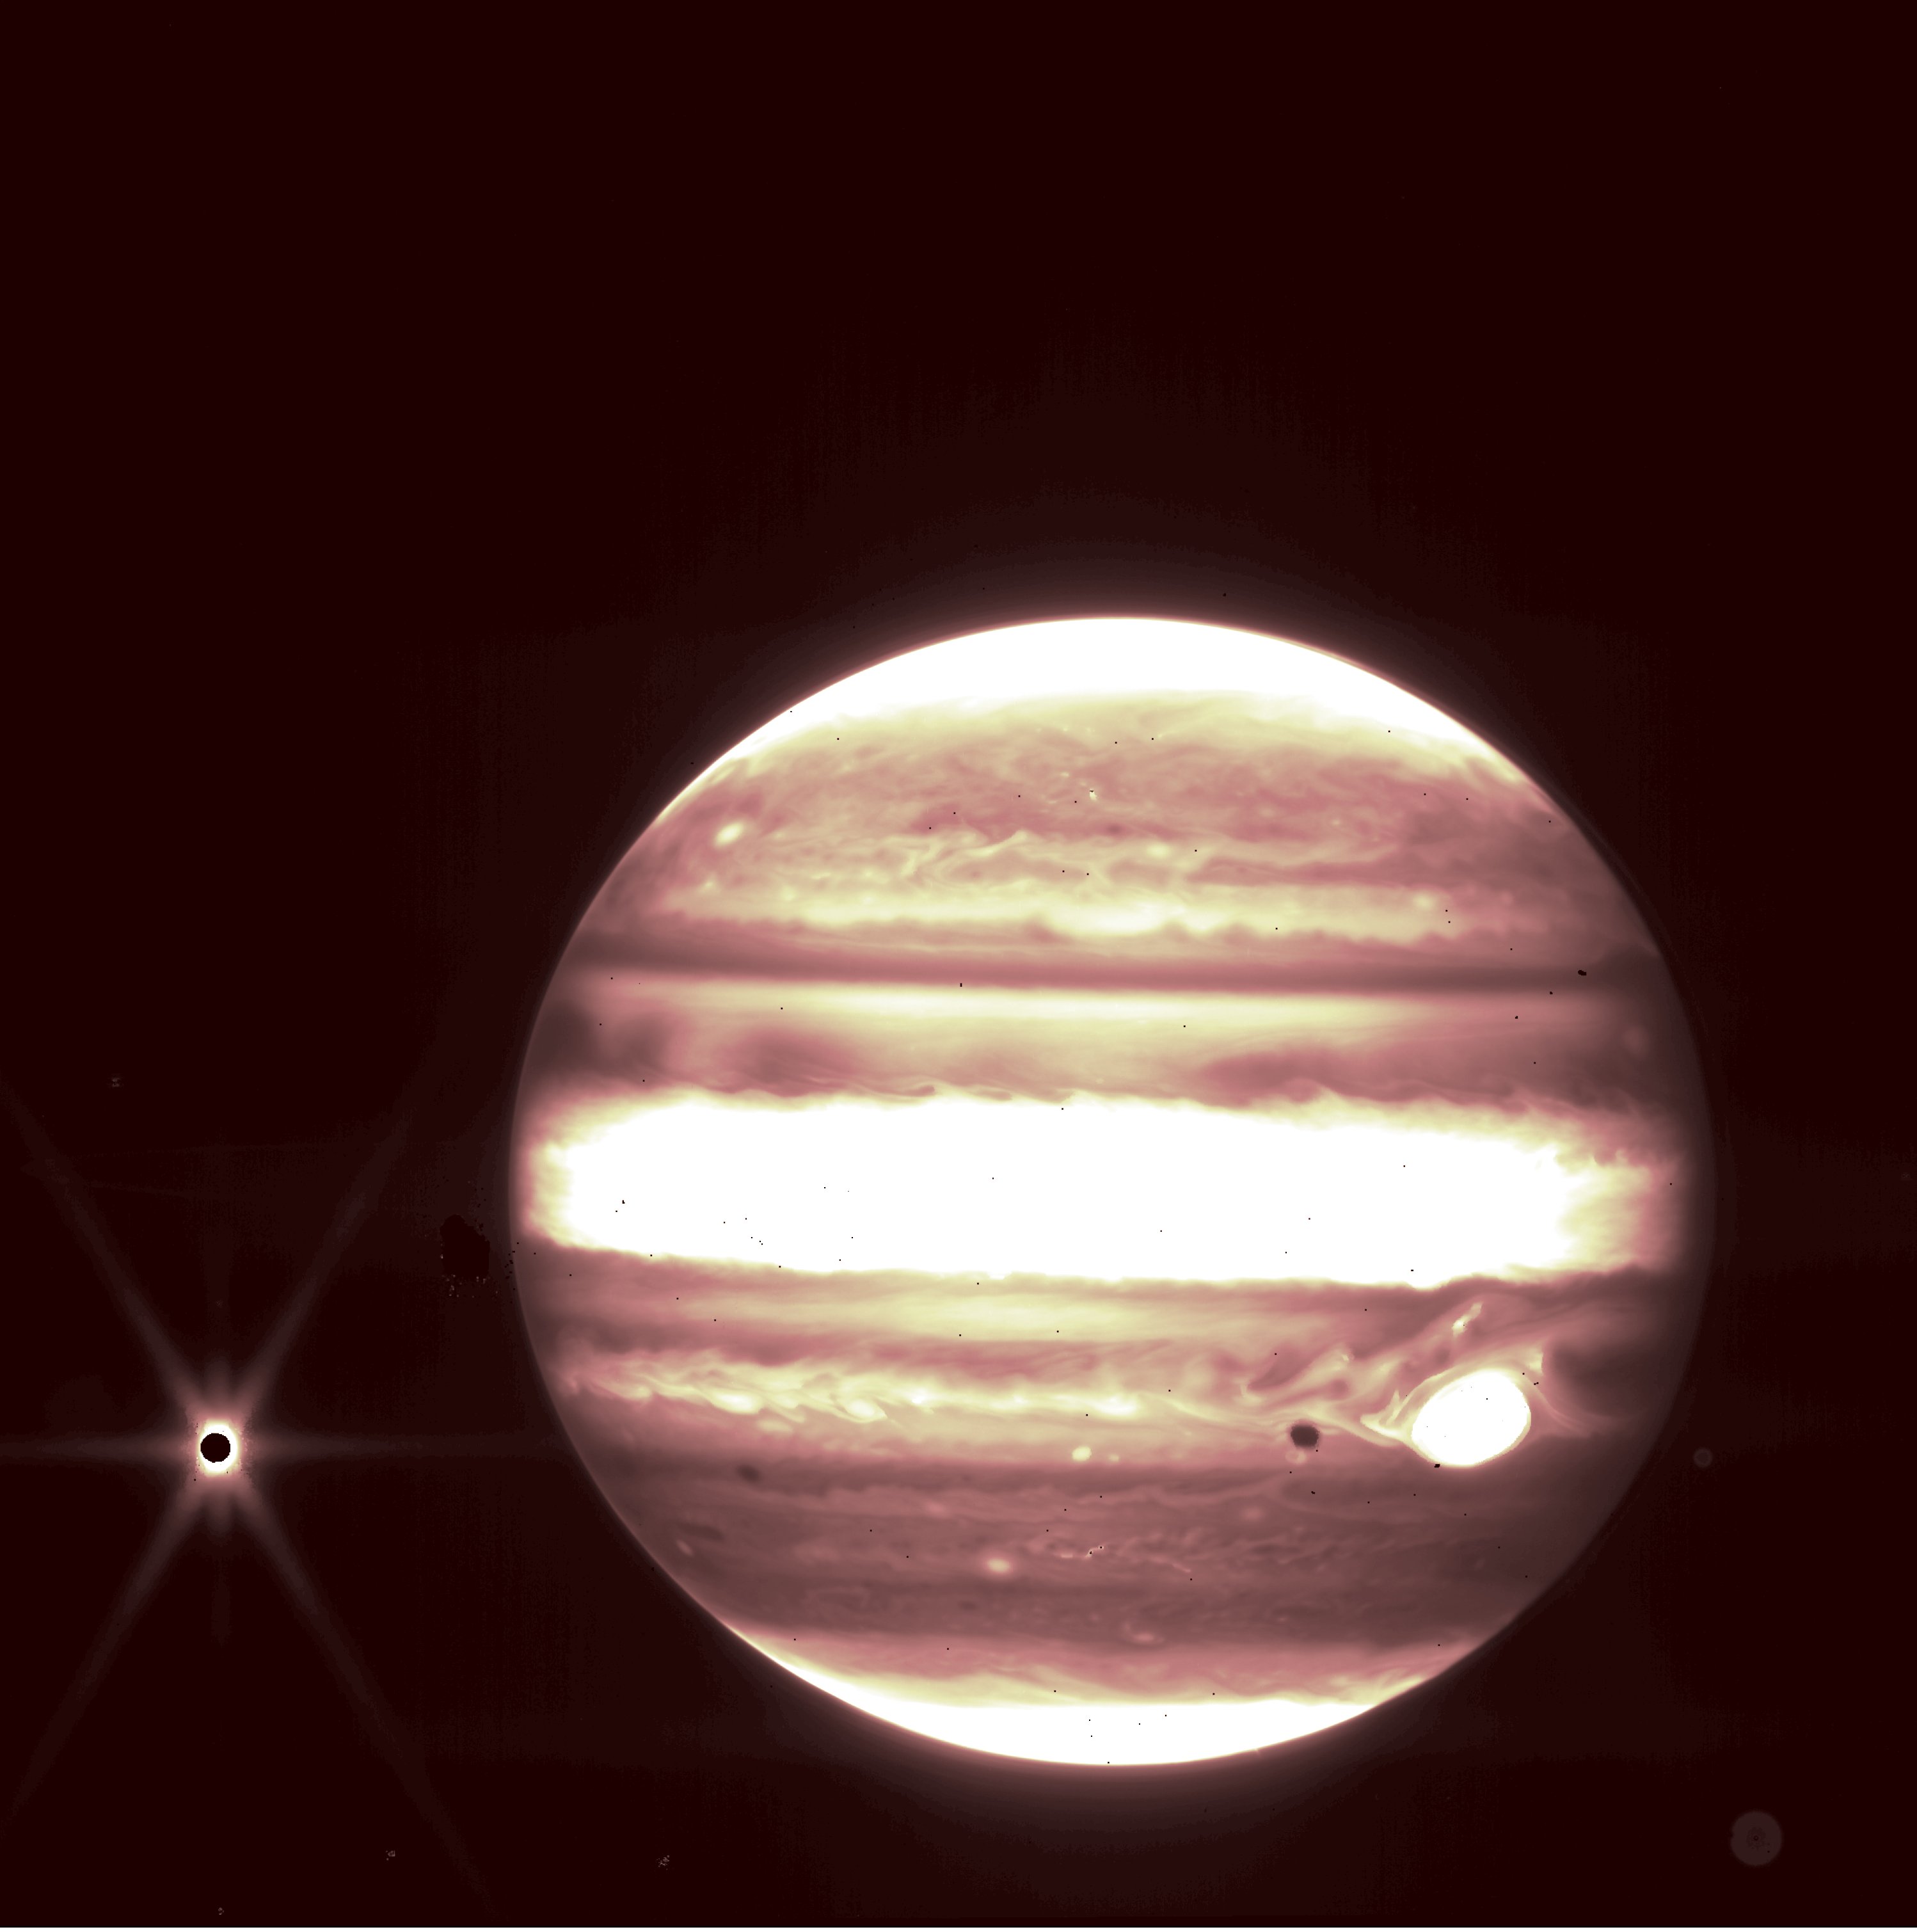 Jupiter dominates the frame, appearing to glow with bands of bright white, light yellow, and darker, brownish oranges. The stripes circle the planet, with one especially thick bright band across the planet’s center. A spot of glowing bright white interrupts the darker brown band about a third from the bottom of the planet. To the left of Jupiter, Europa appears as a tiny, black circle with a bright starburst erupting from its edges. The background of the image is pure black.